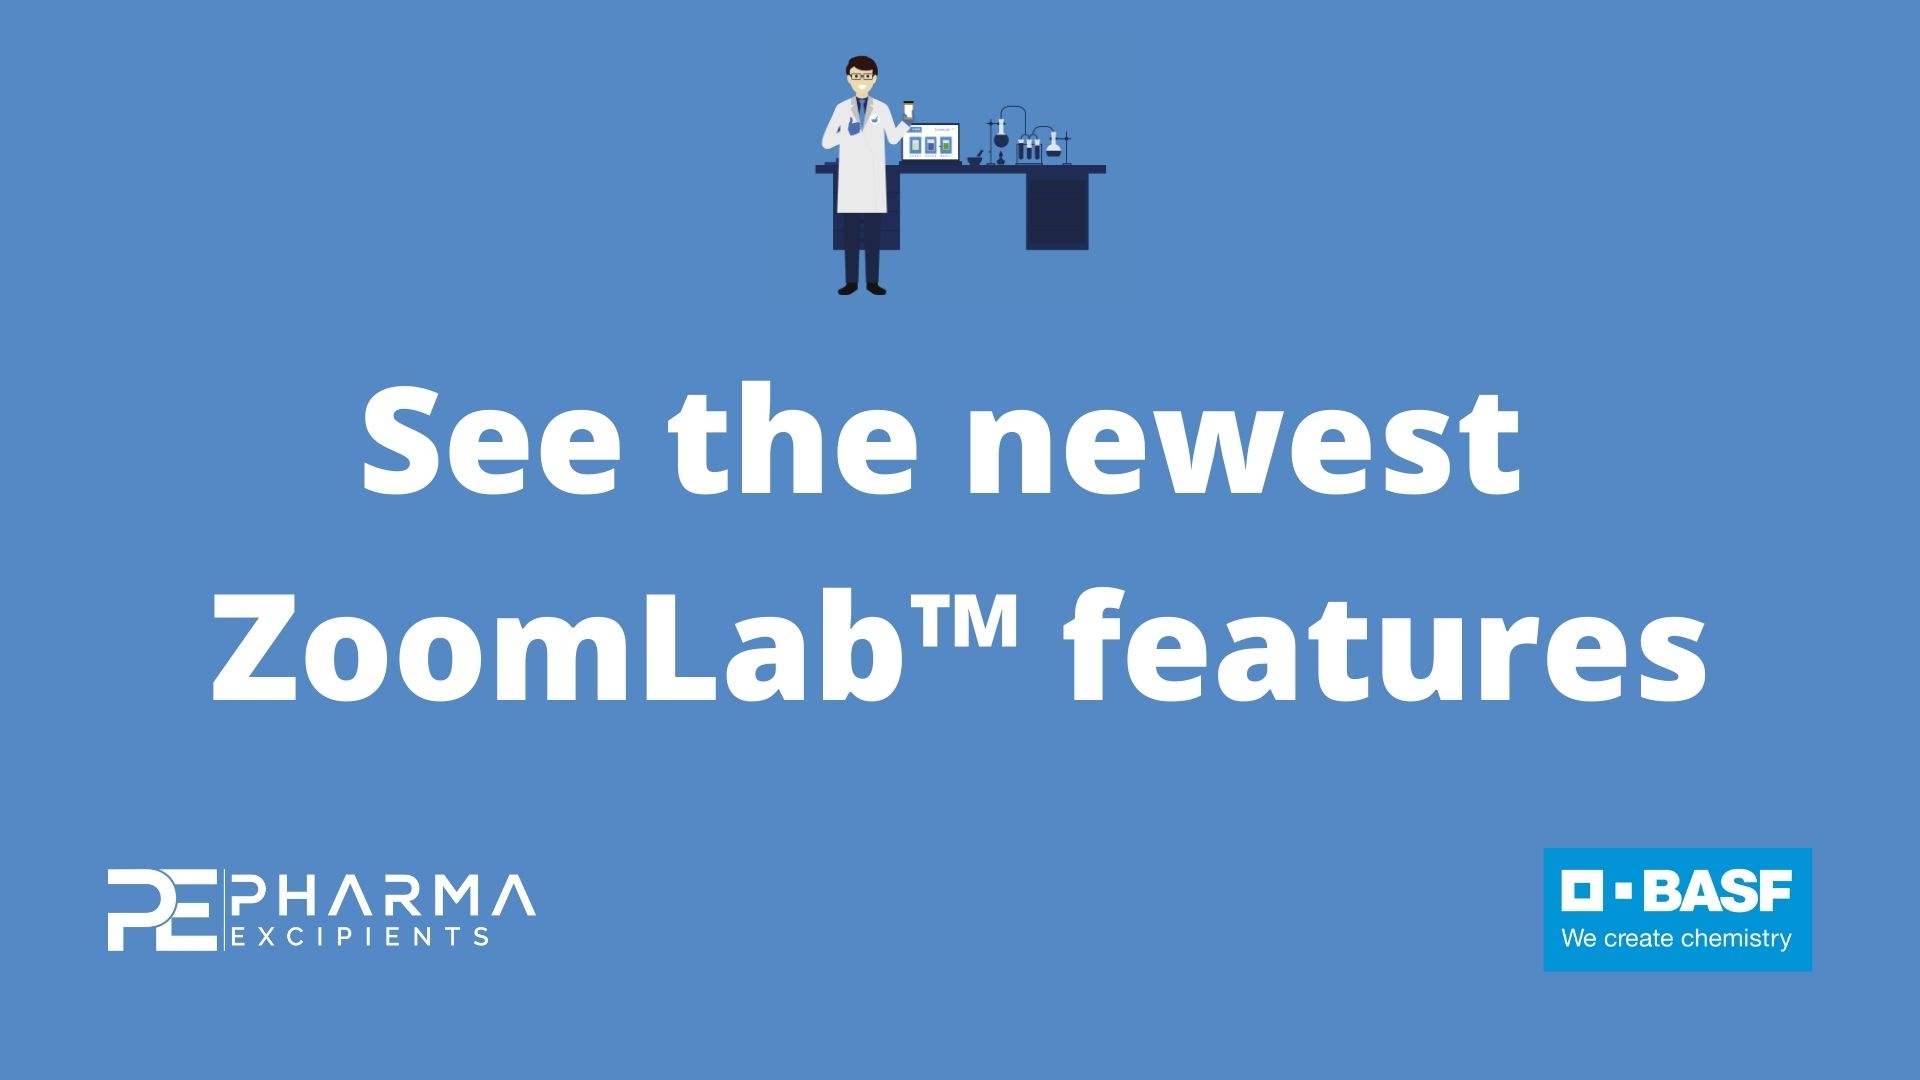 See the newest Zoomlab features